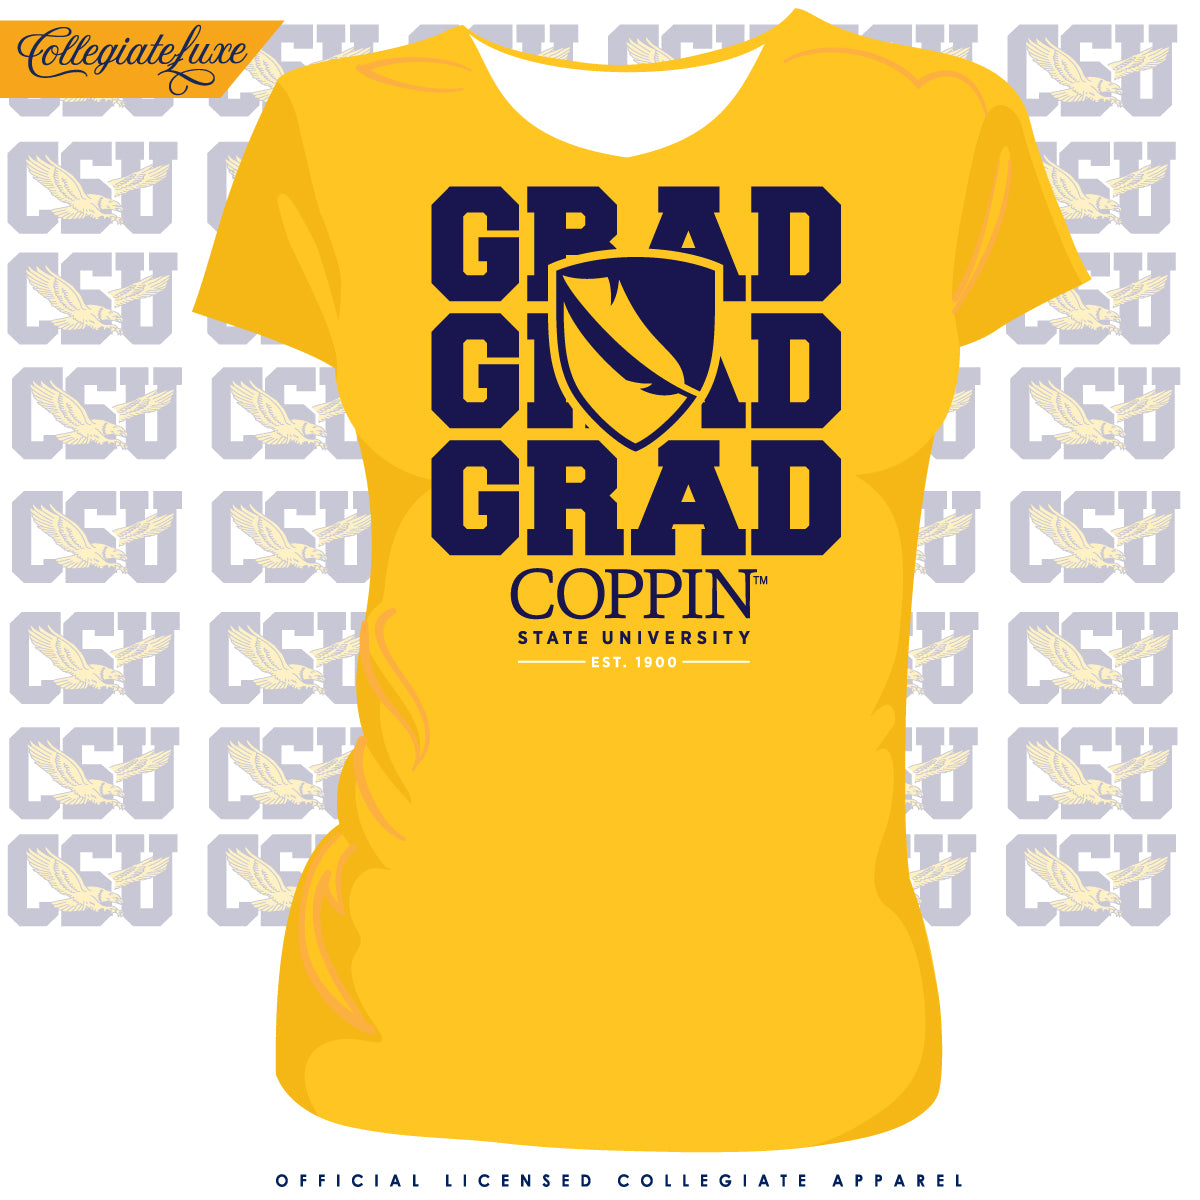 Coppin St. | GRAD Gold Ladies Tees (Z)